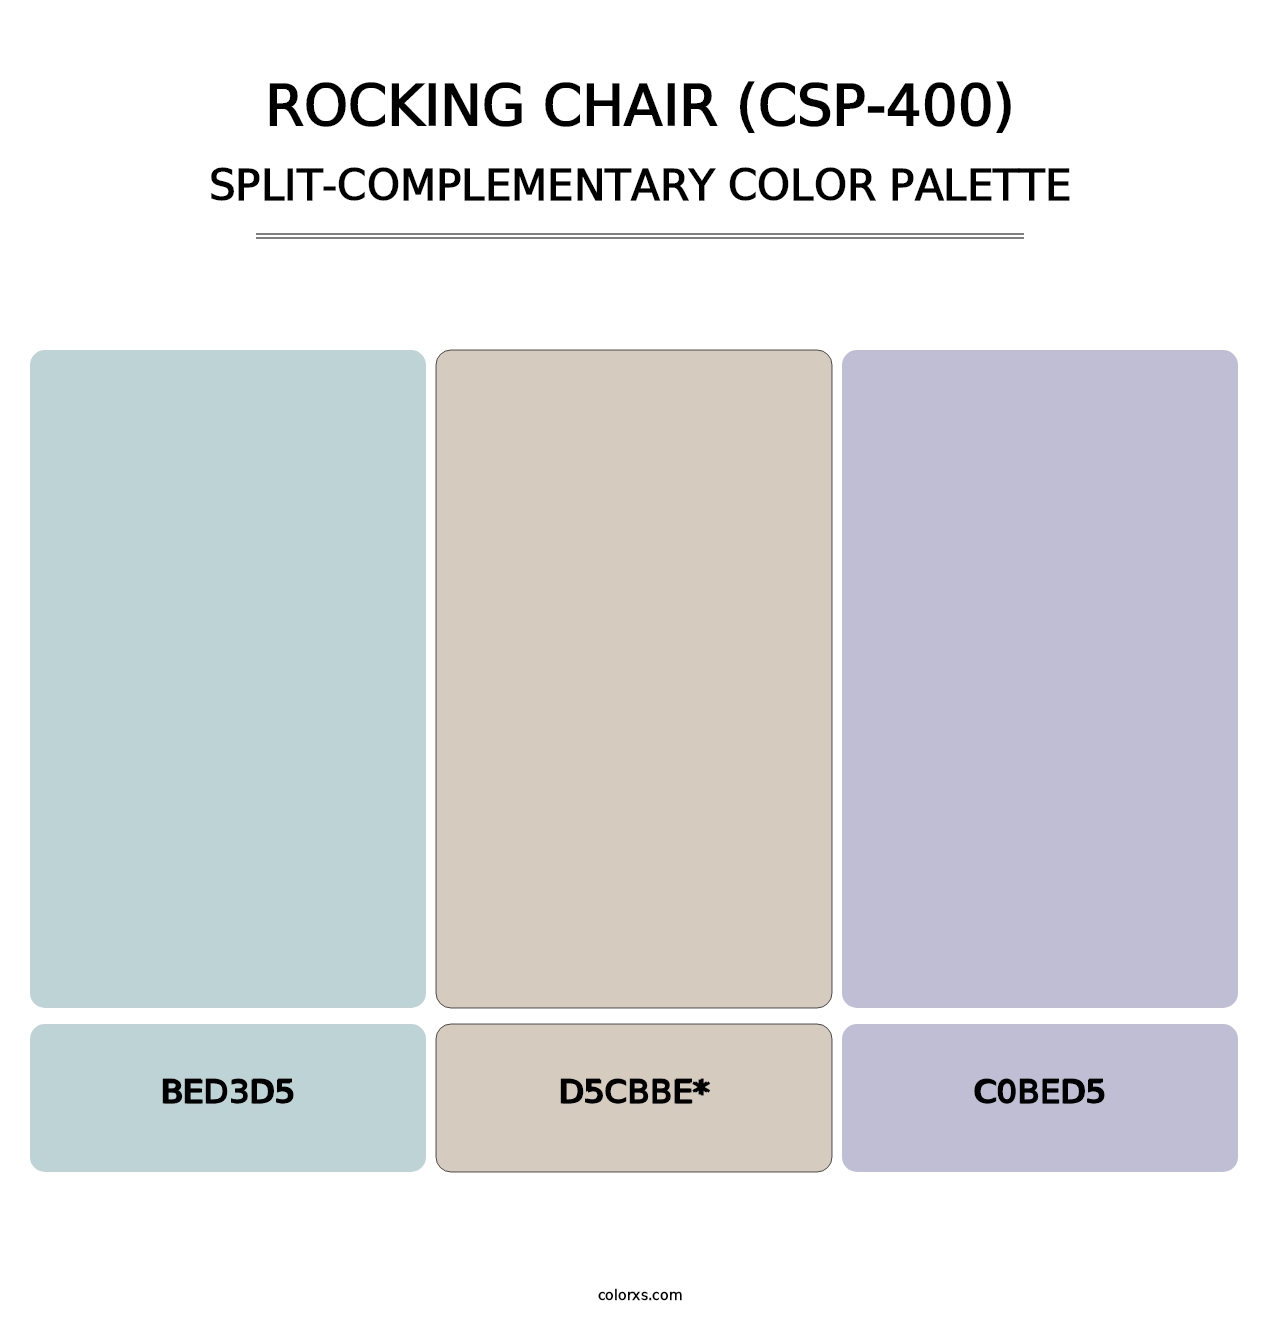 Rocking Chair (CSP-400) - Split-Complementary Color Palette